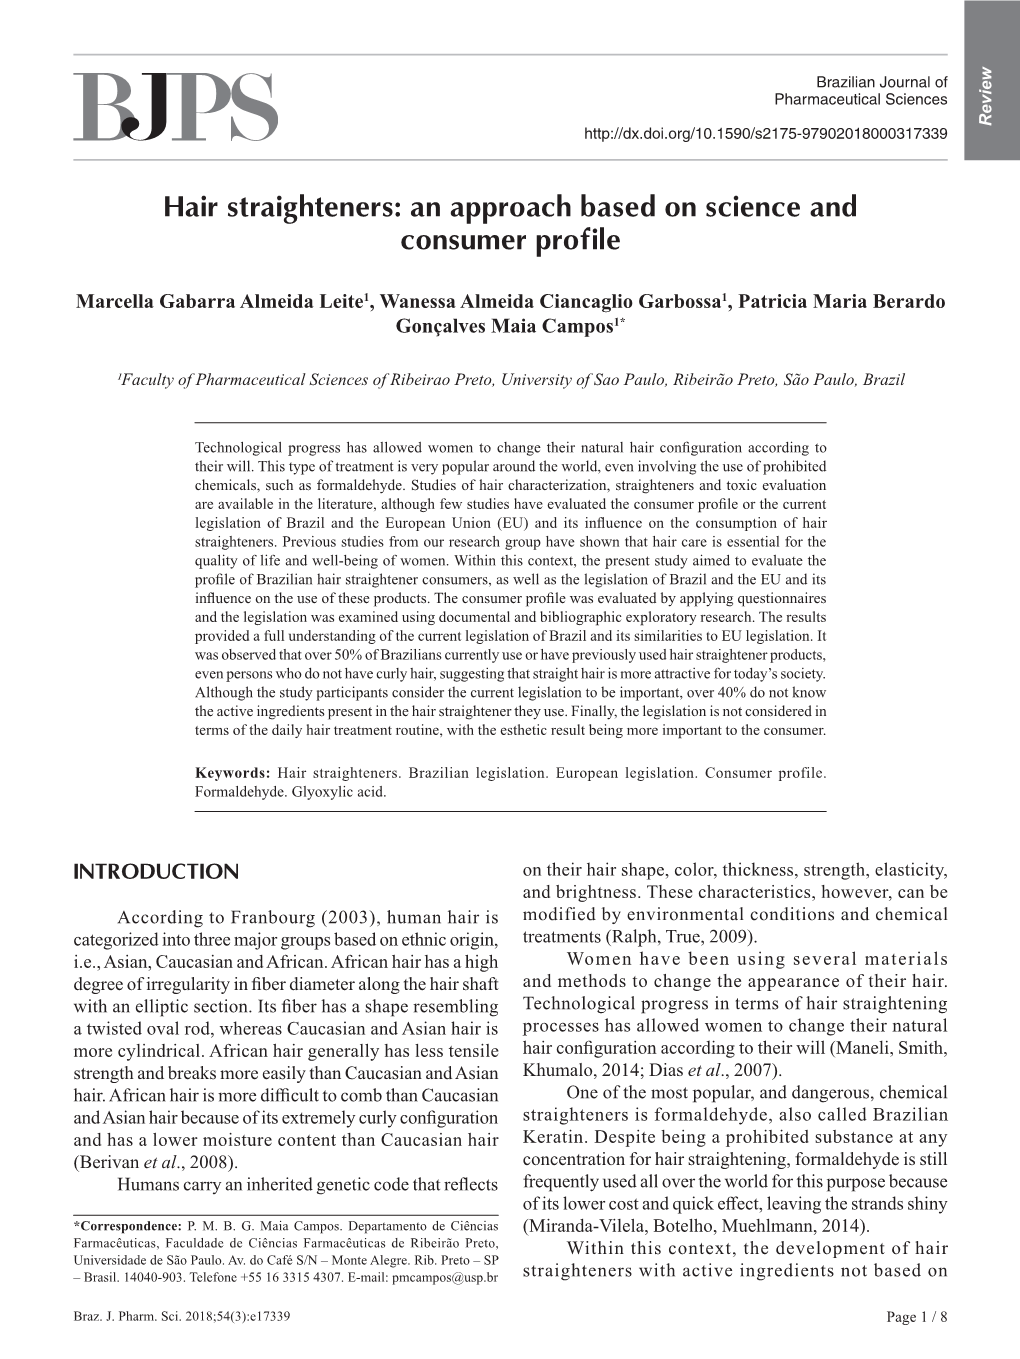 Hair Straighteners: an Approach Based on Science and Consumer Profile